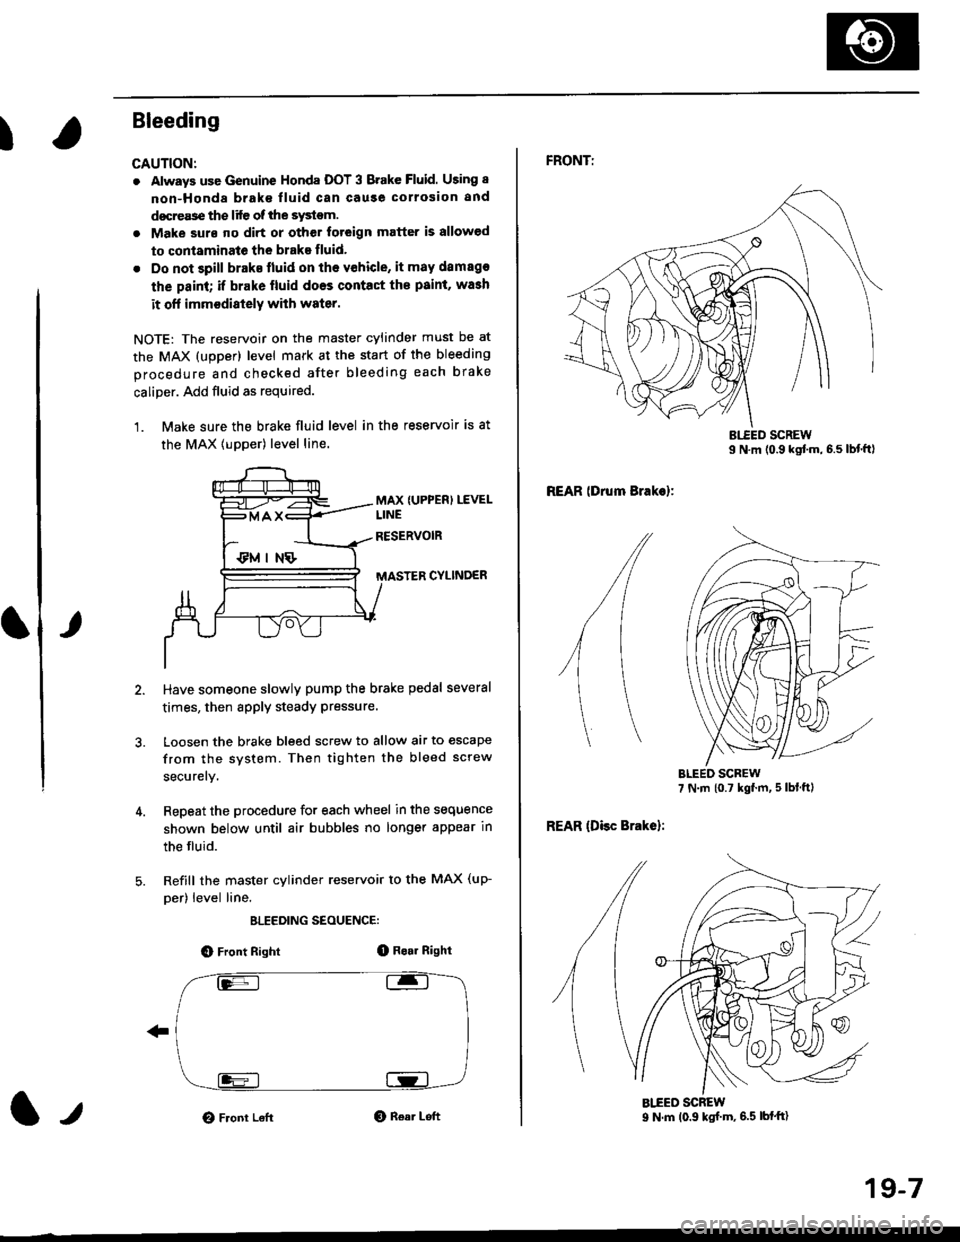 HONDA CIVIC 1997 6.G Owners Manual I
Bleeding
CAUTION:
. Always use Genuine Honda DOT 3 Brake Fluid. Using 8
non-Honda brak€ fluid can cause corrosion and
docrea3e the life of the system.
. Make surs ||o dirt or other foteign matter 